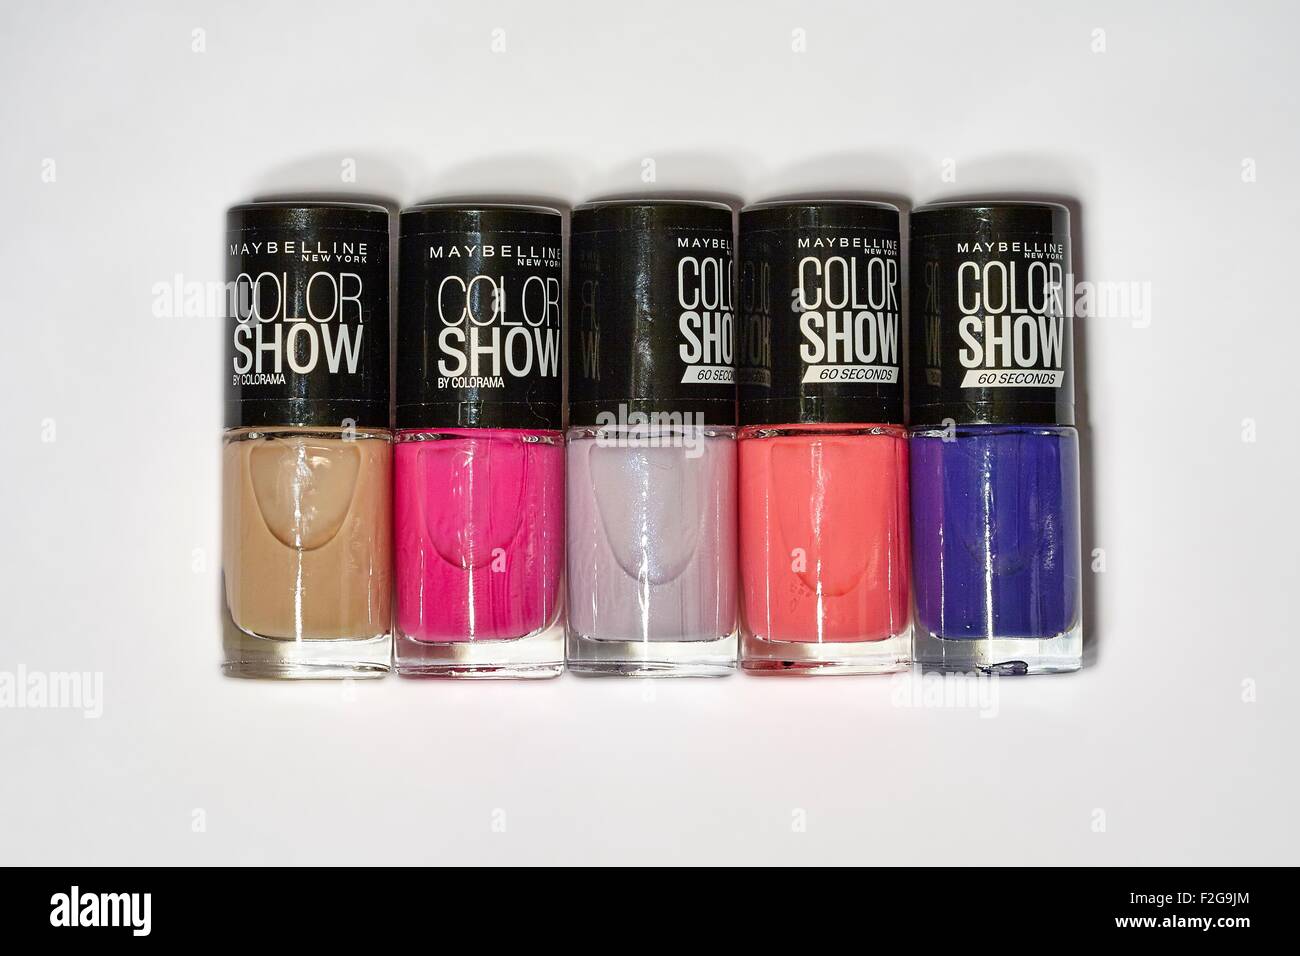 Maybelline Color Show 